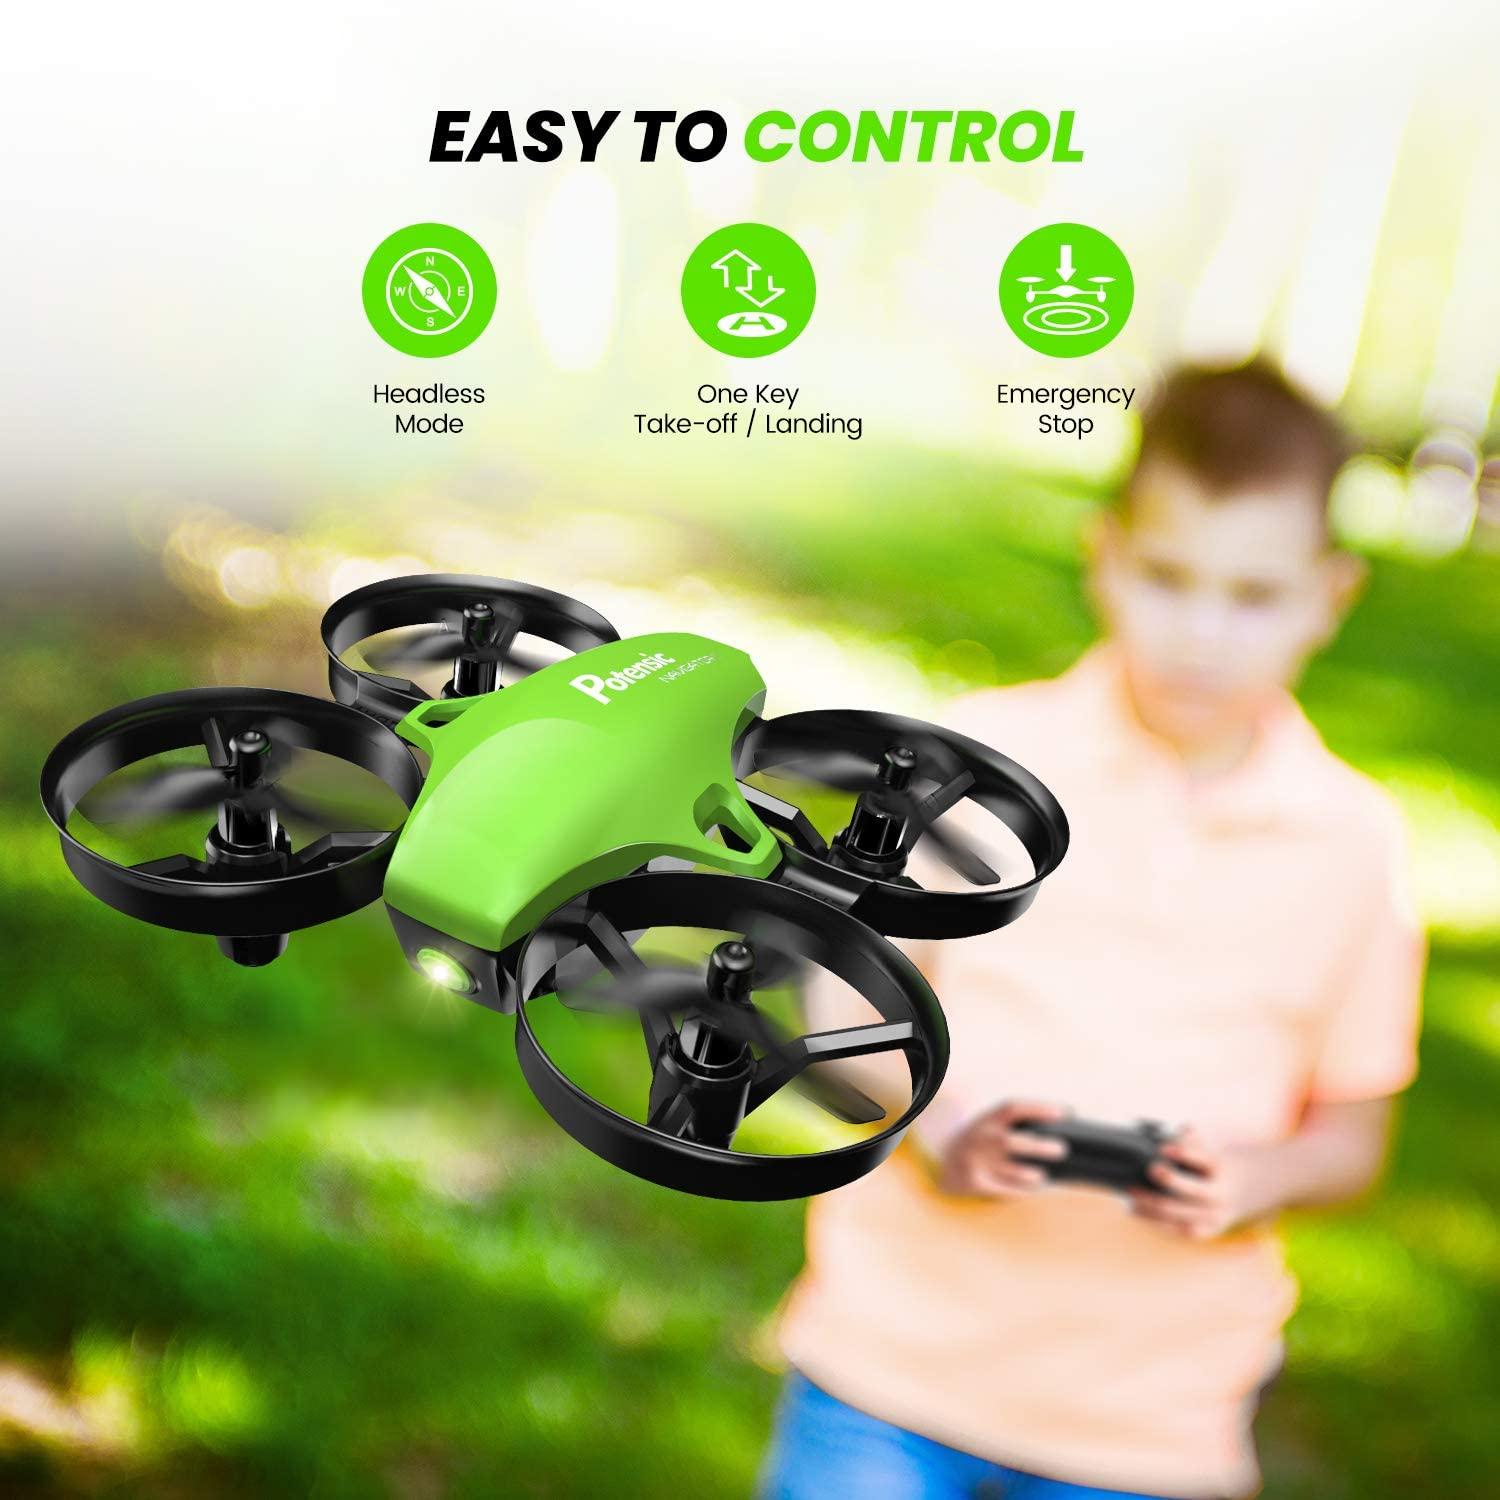 AVIALOGIC Mini Drone - with Camera for Kids, Remote Control Helicopter –  RCDrone